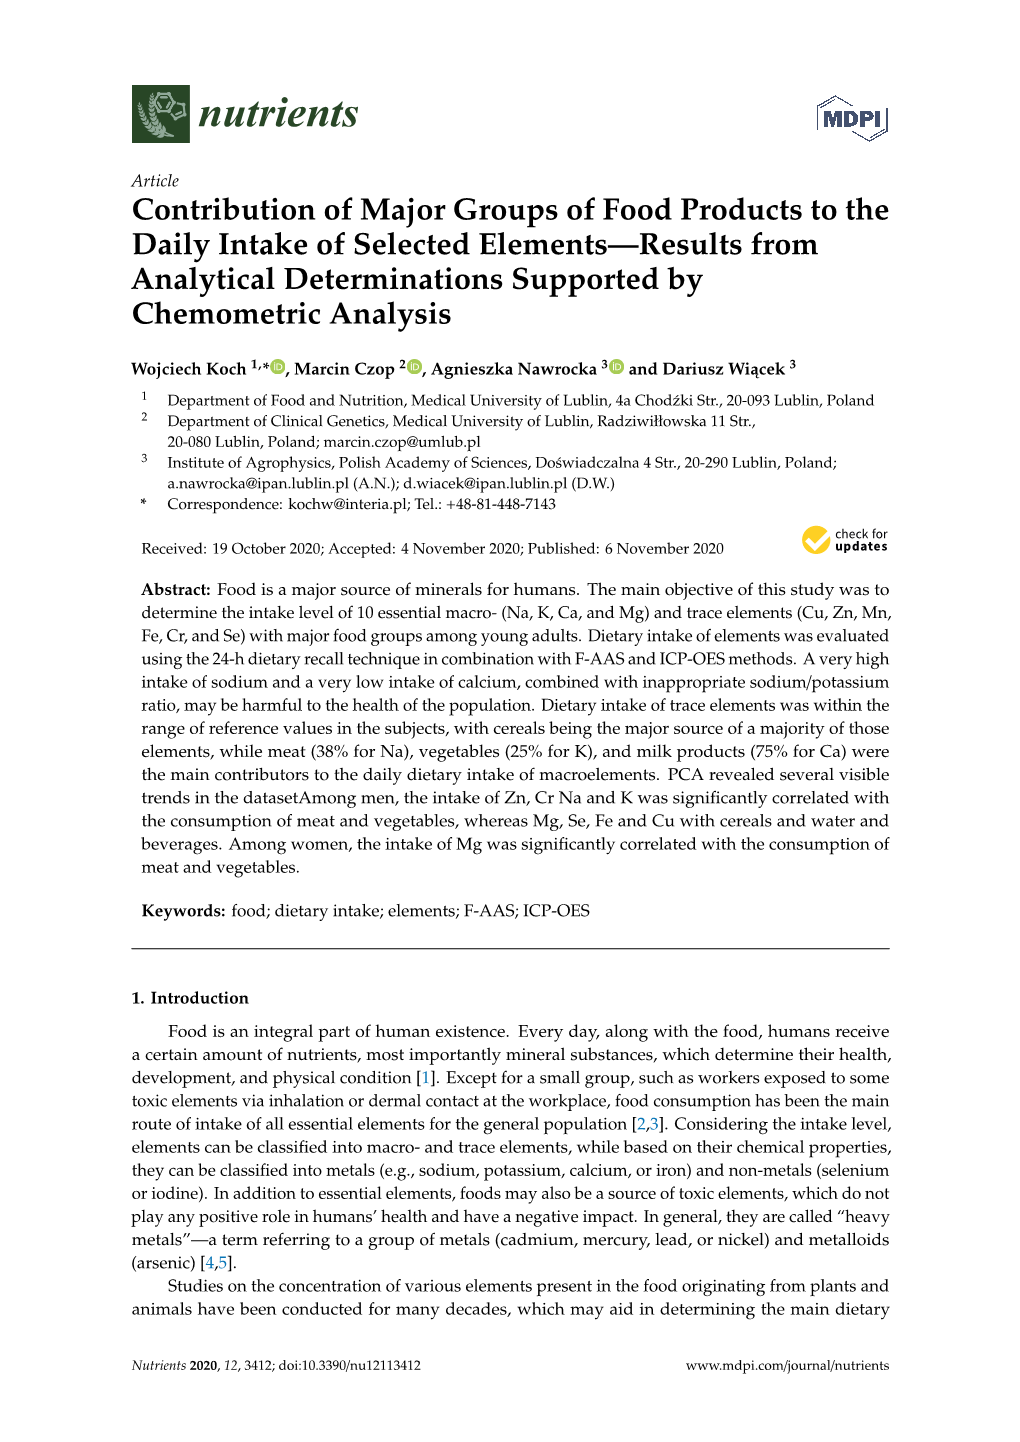 Contribution of Major Groups of Food Products to the Daily Intake of Selected Elements—Results from Analytical Determinations Supported by Chemometric Analysis